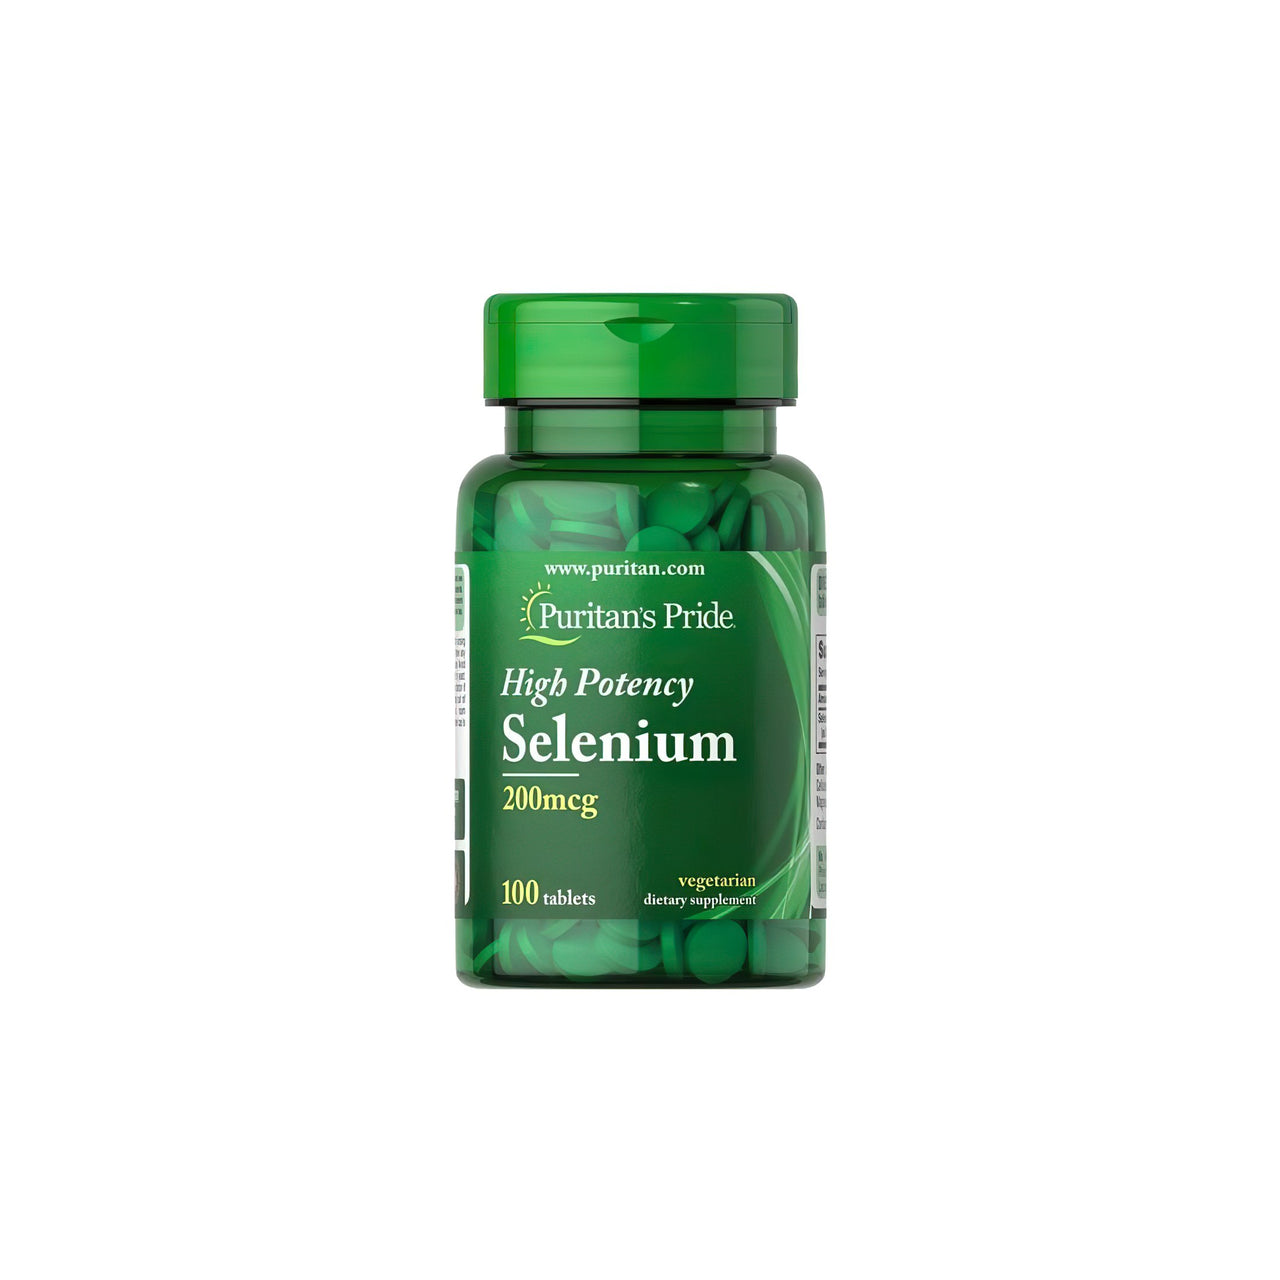 Puritan's Pride Selenium 200 mcg 100 tablets dietary supplement capsules with high purity.